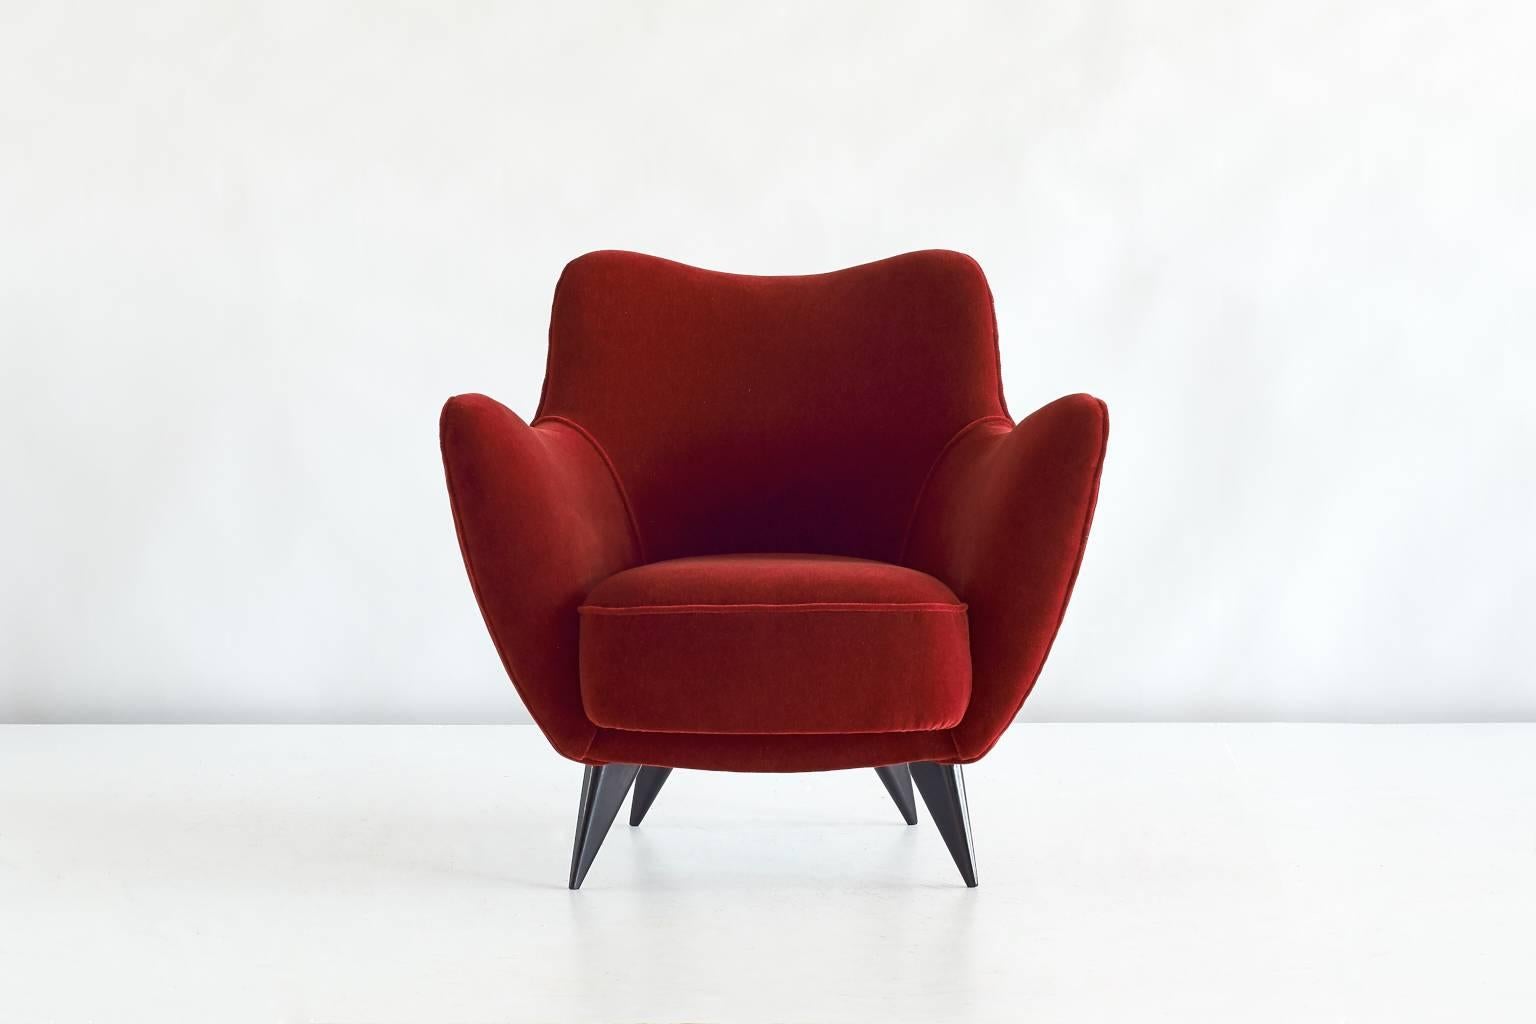 A rare ‘Perla’ armchair designed by Giulia Veronesi and produced by ISA Bergamo, Italy. Its sensual curves and the elegantly tapered legs give this chair a sculptural and modern feel. The armchair has been fully reconditioned and newly upholstered